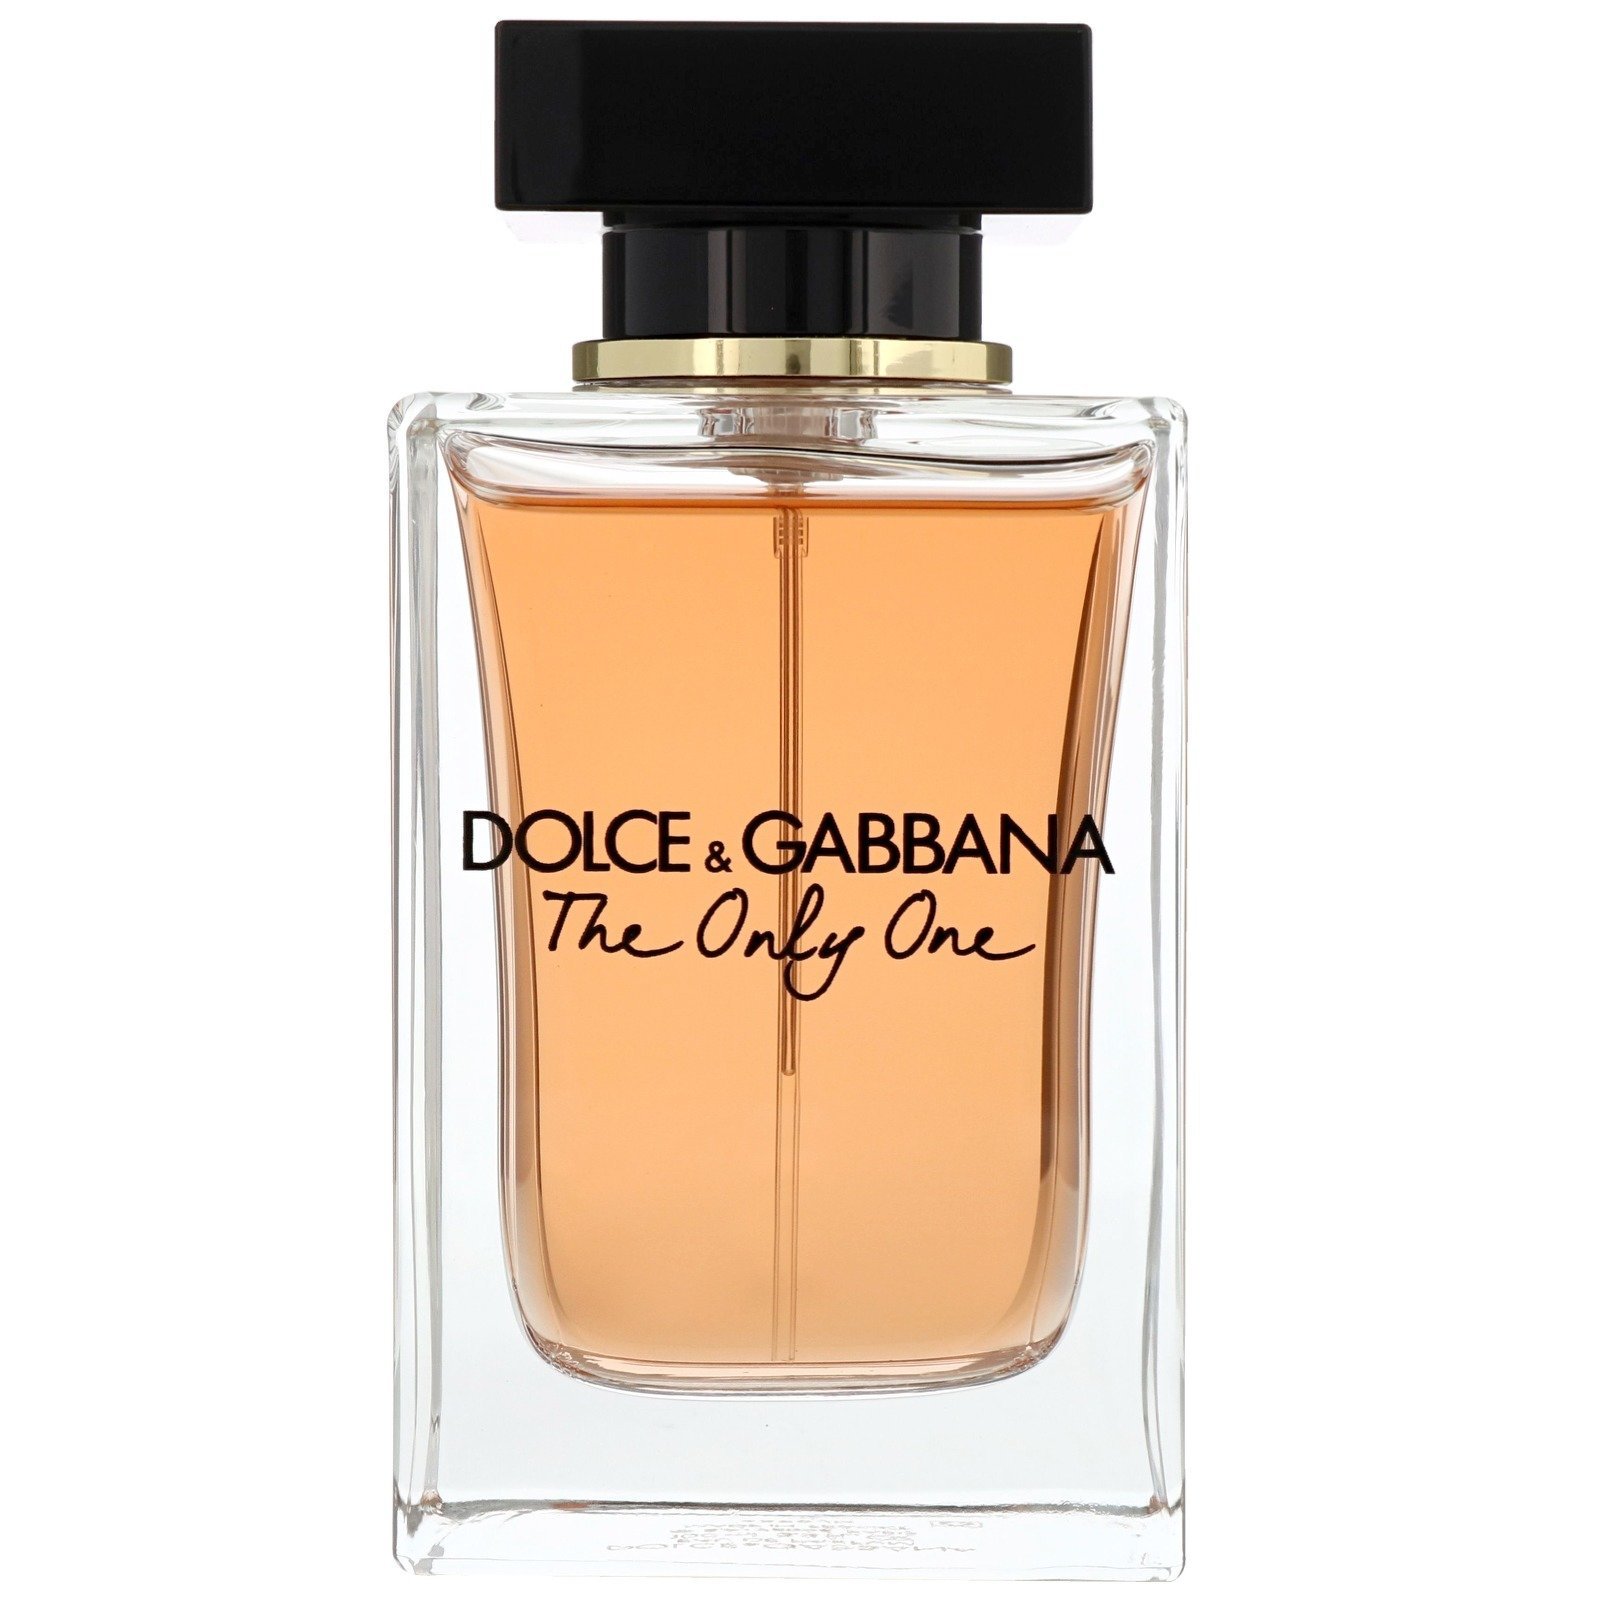 Духи dolce only one. Dolce & Gabbana the only one, EDP., 100 ml. Dolce & Gabbana the only one 100 мл. Dolce & Gabbana the only one EDP 50 ml. Dolce& Gabbana the only one 2 EDP, 100 ml.